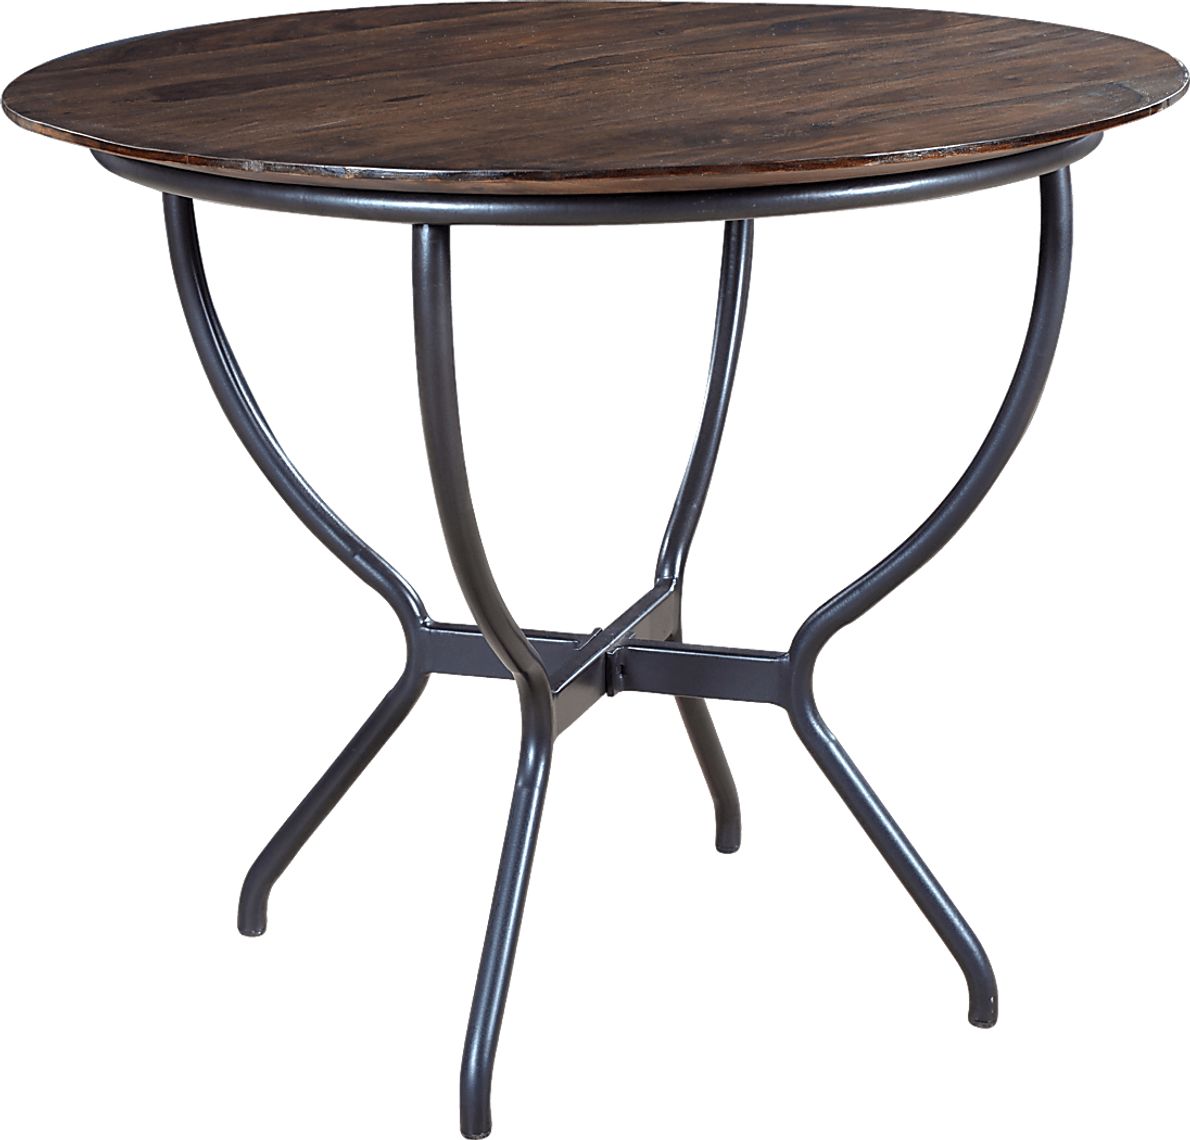 Sose Brown Dining Table